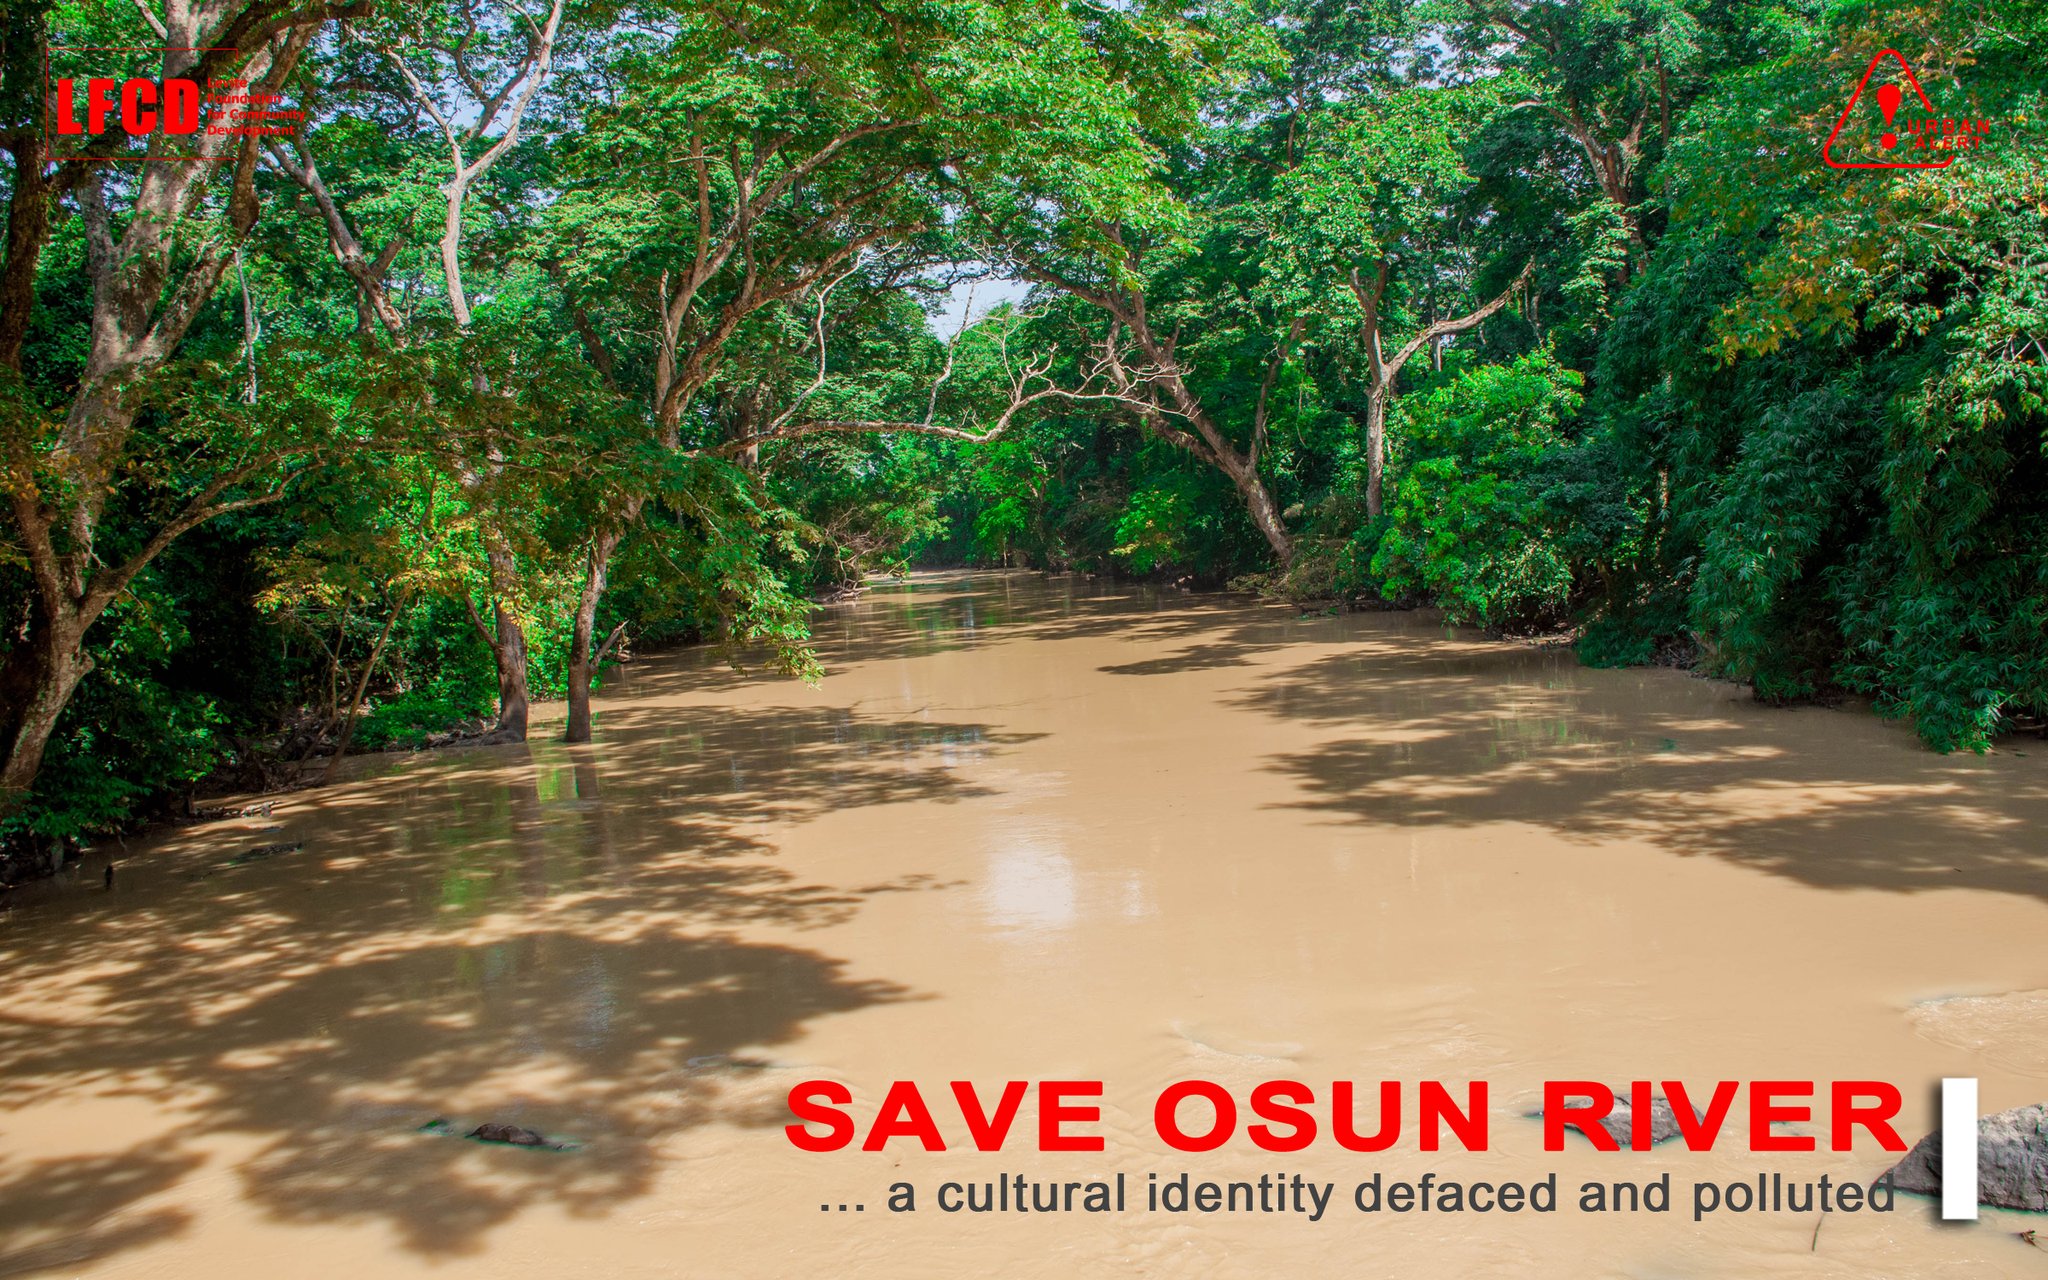 2,000 Concerned People Sign Petition To Save Osun River